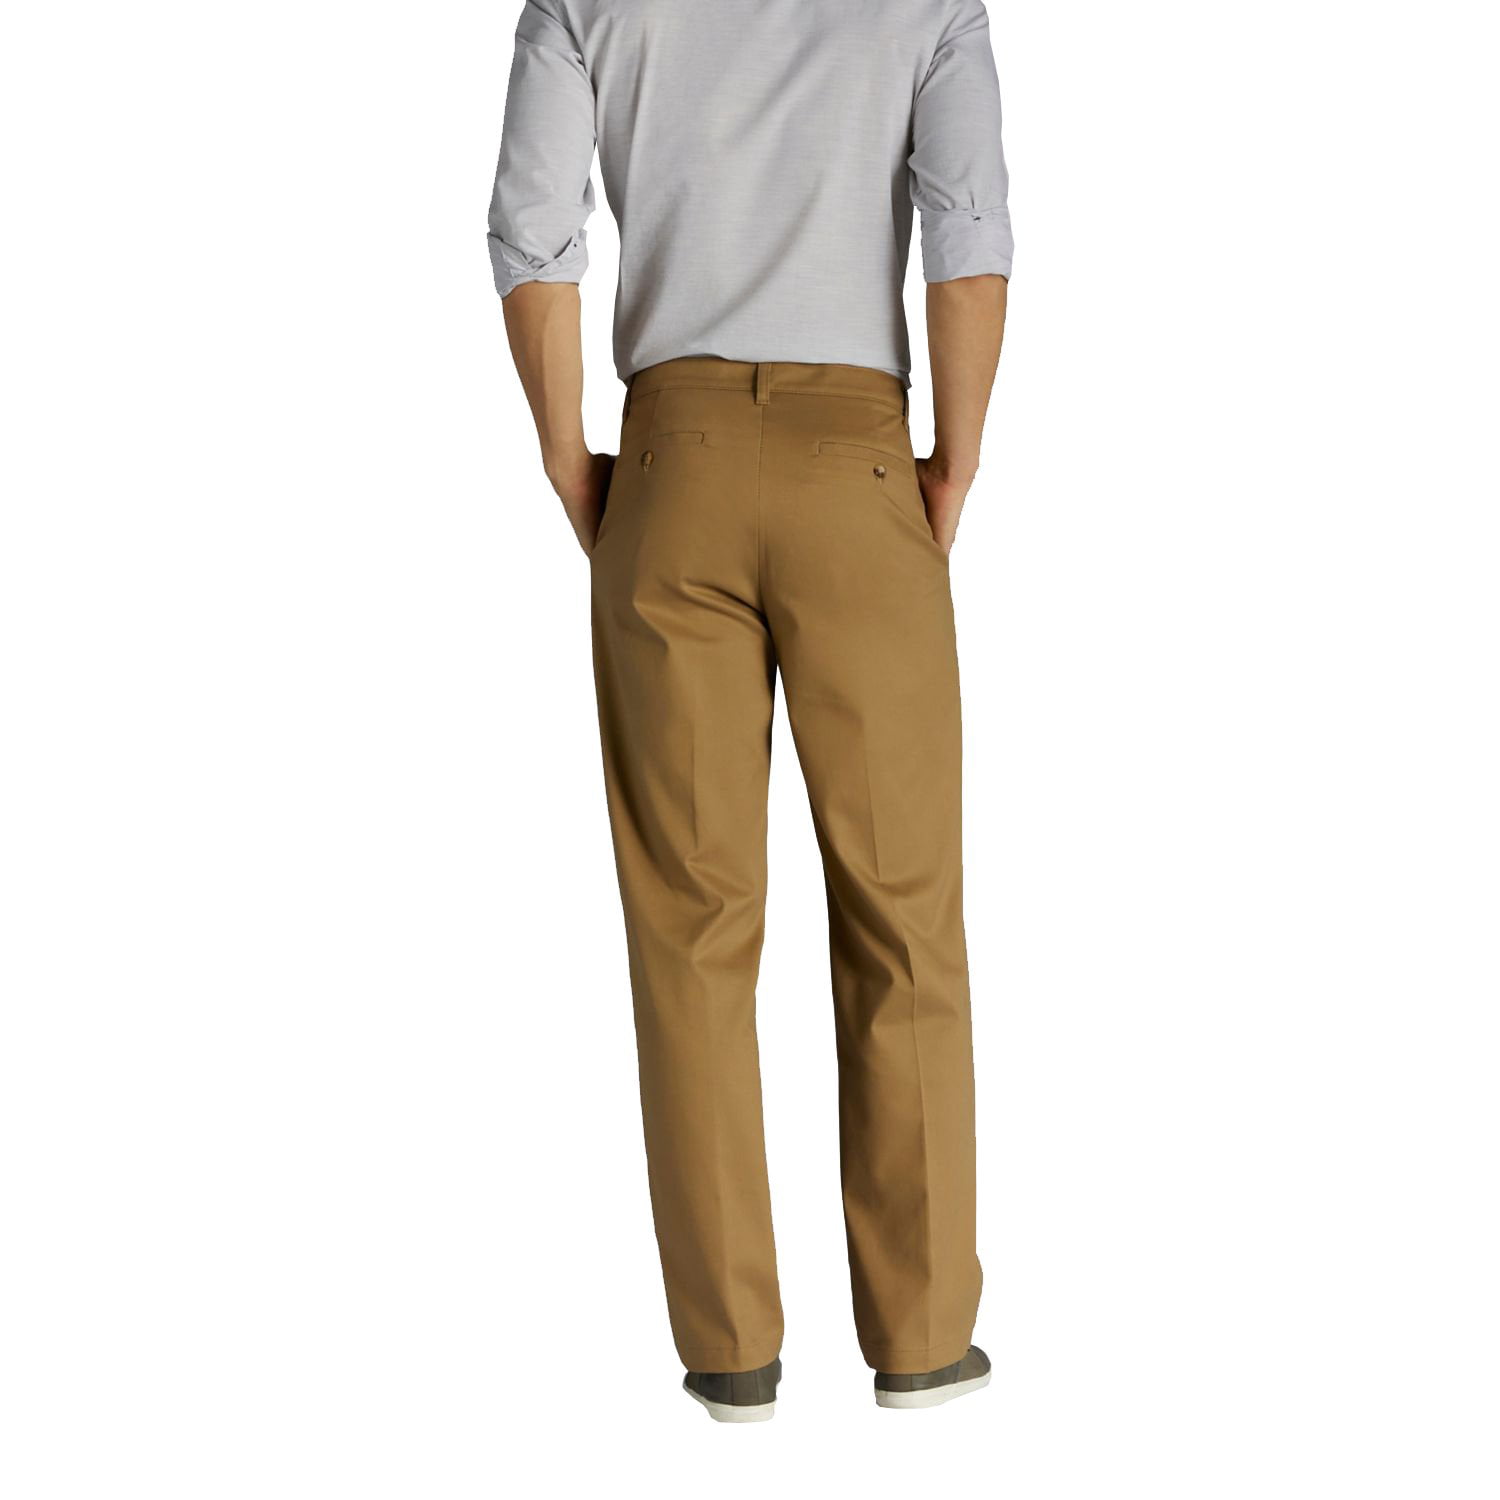 lee total freedom relaxed fit khaki